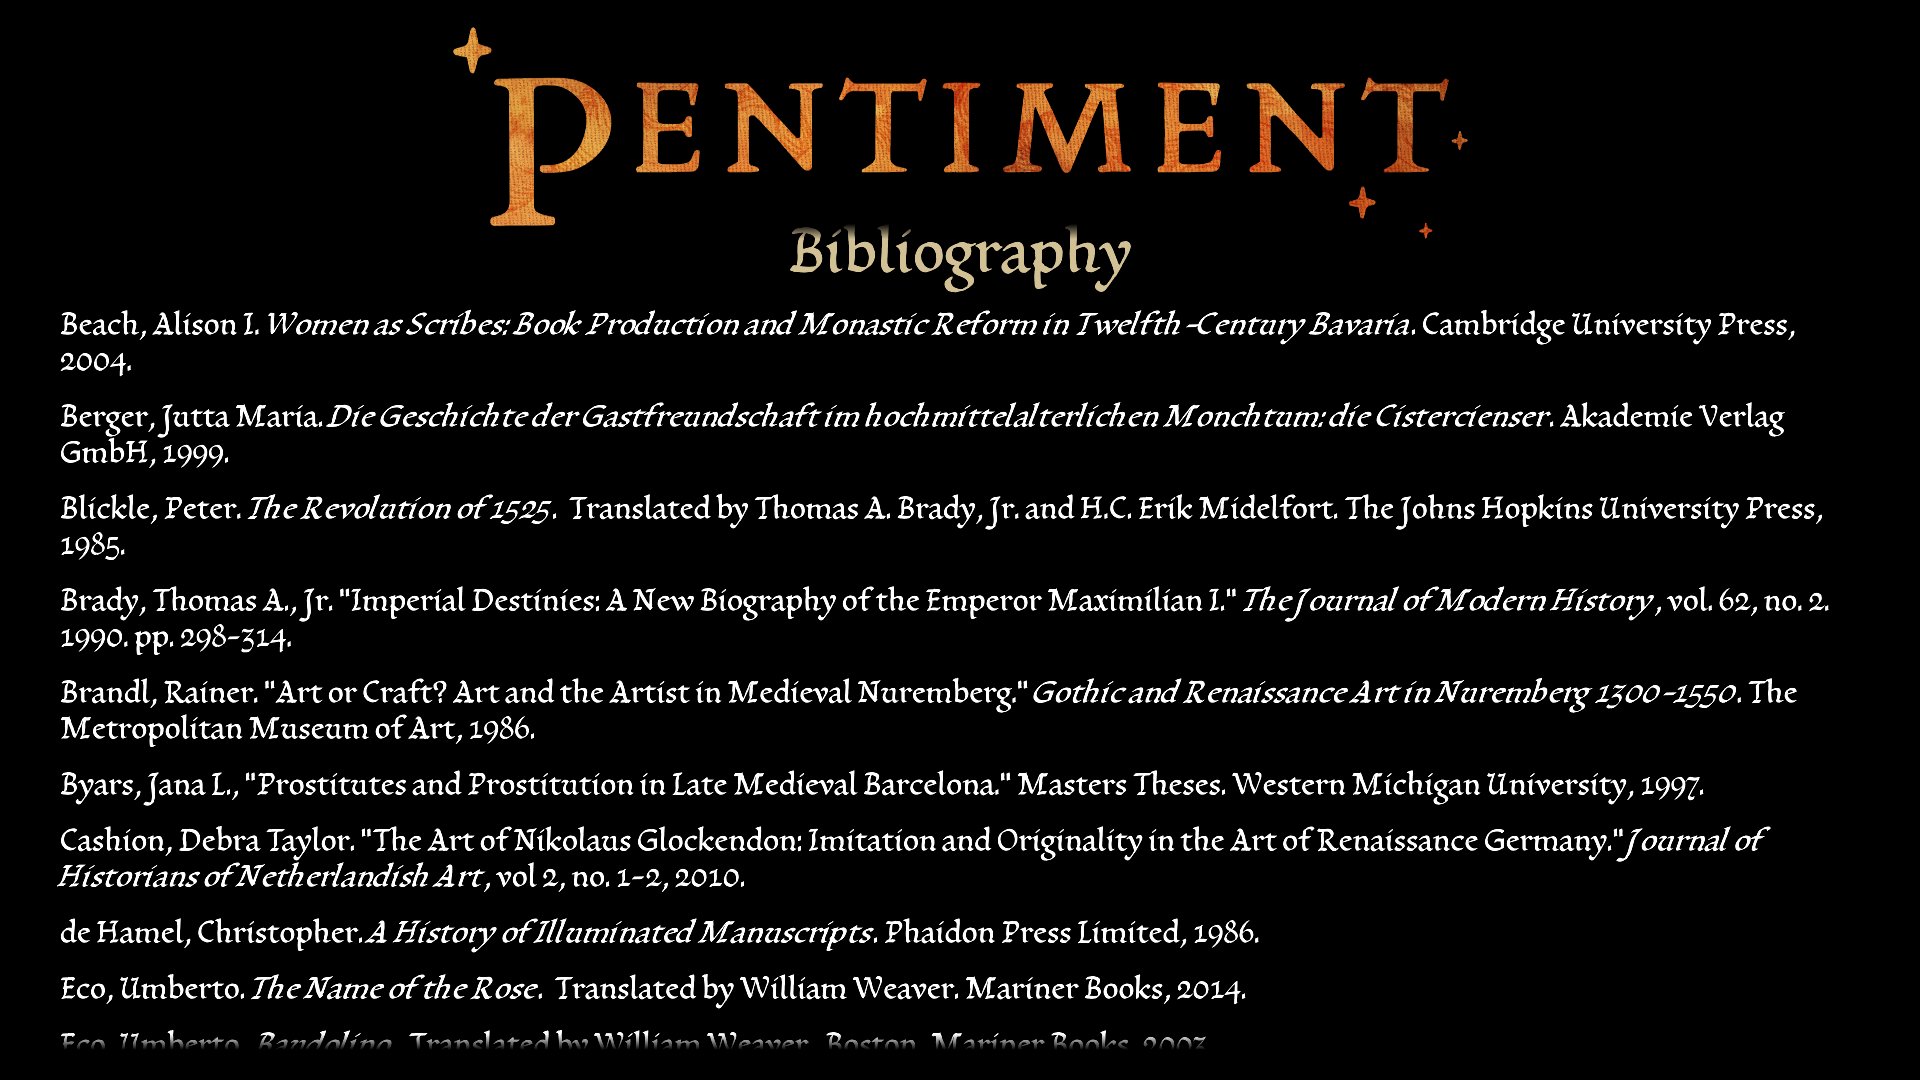 Felipe Pepe on Twitter: "Pentiment lists bibliography in its credits and I  think that's beautiful ❤️" / Twitter